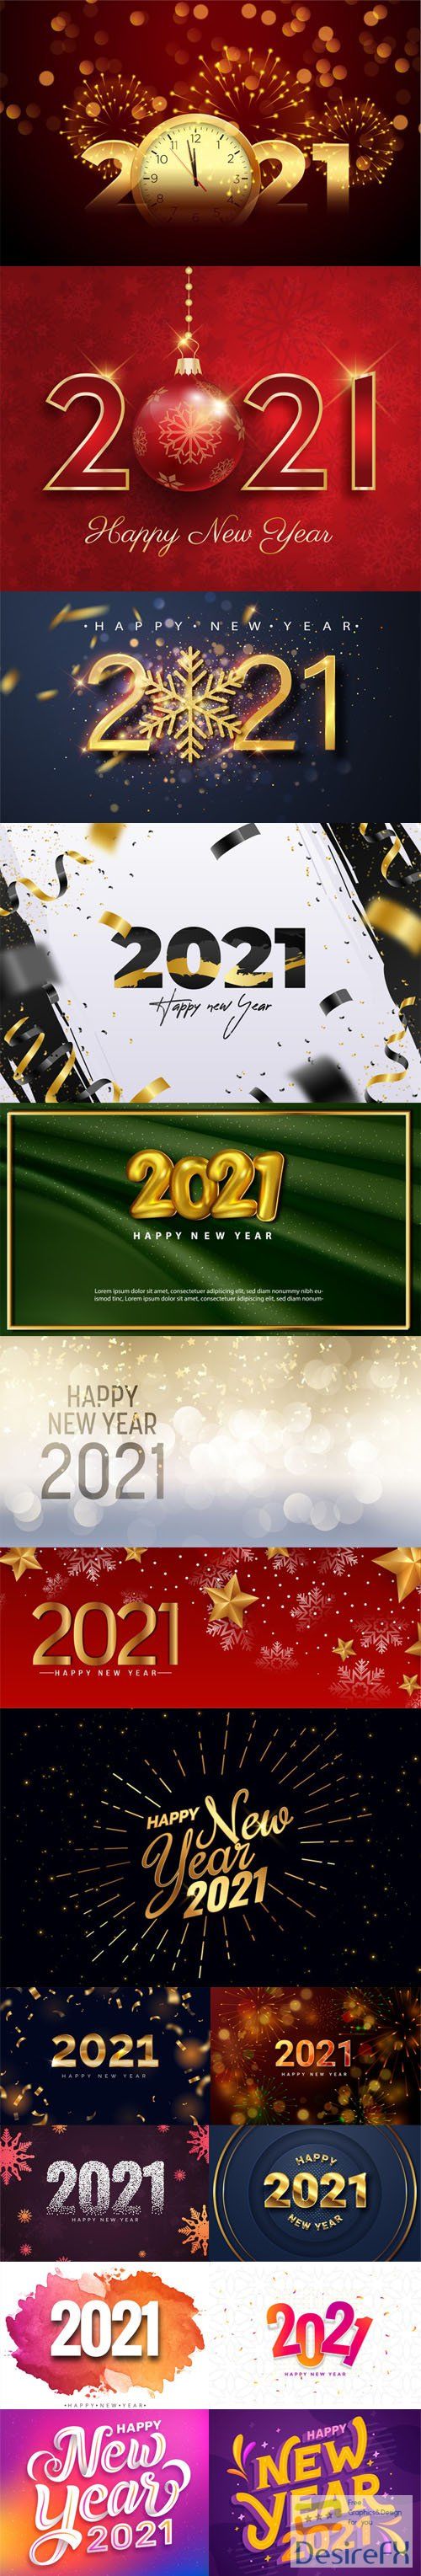 16 Happy New Year 2021 Backgrounds &amp; Lettering Templates in Vector